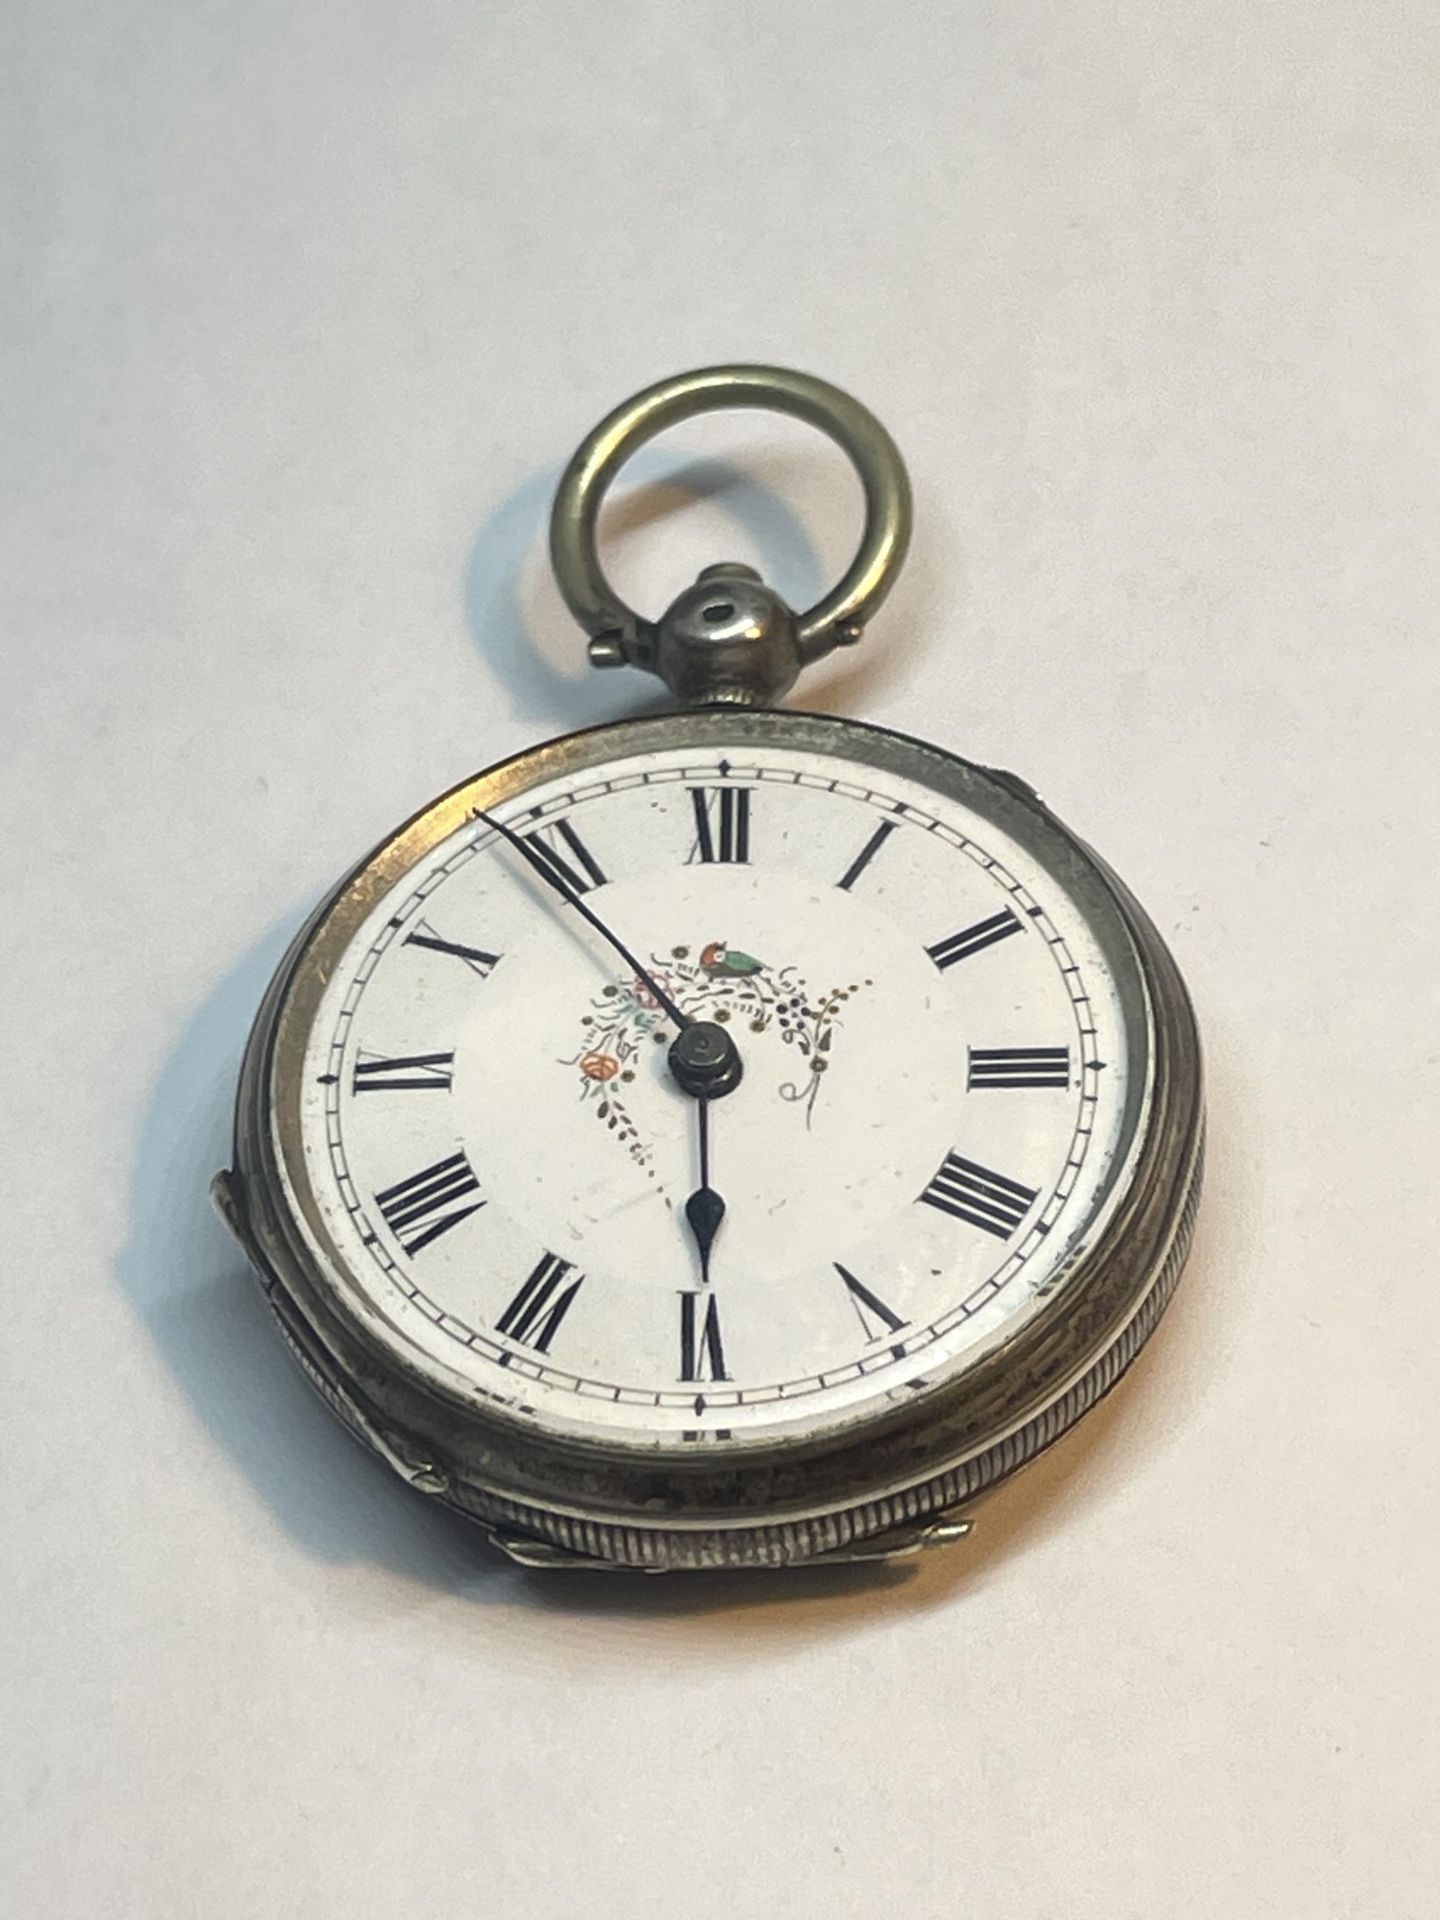 A MARKED 800 SILVER POCKET WATCH WITH WHITE ENAMEL DECORATIVE FACE AND ROMAN NUMERALS